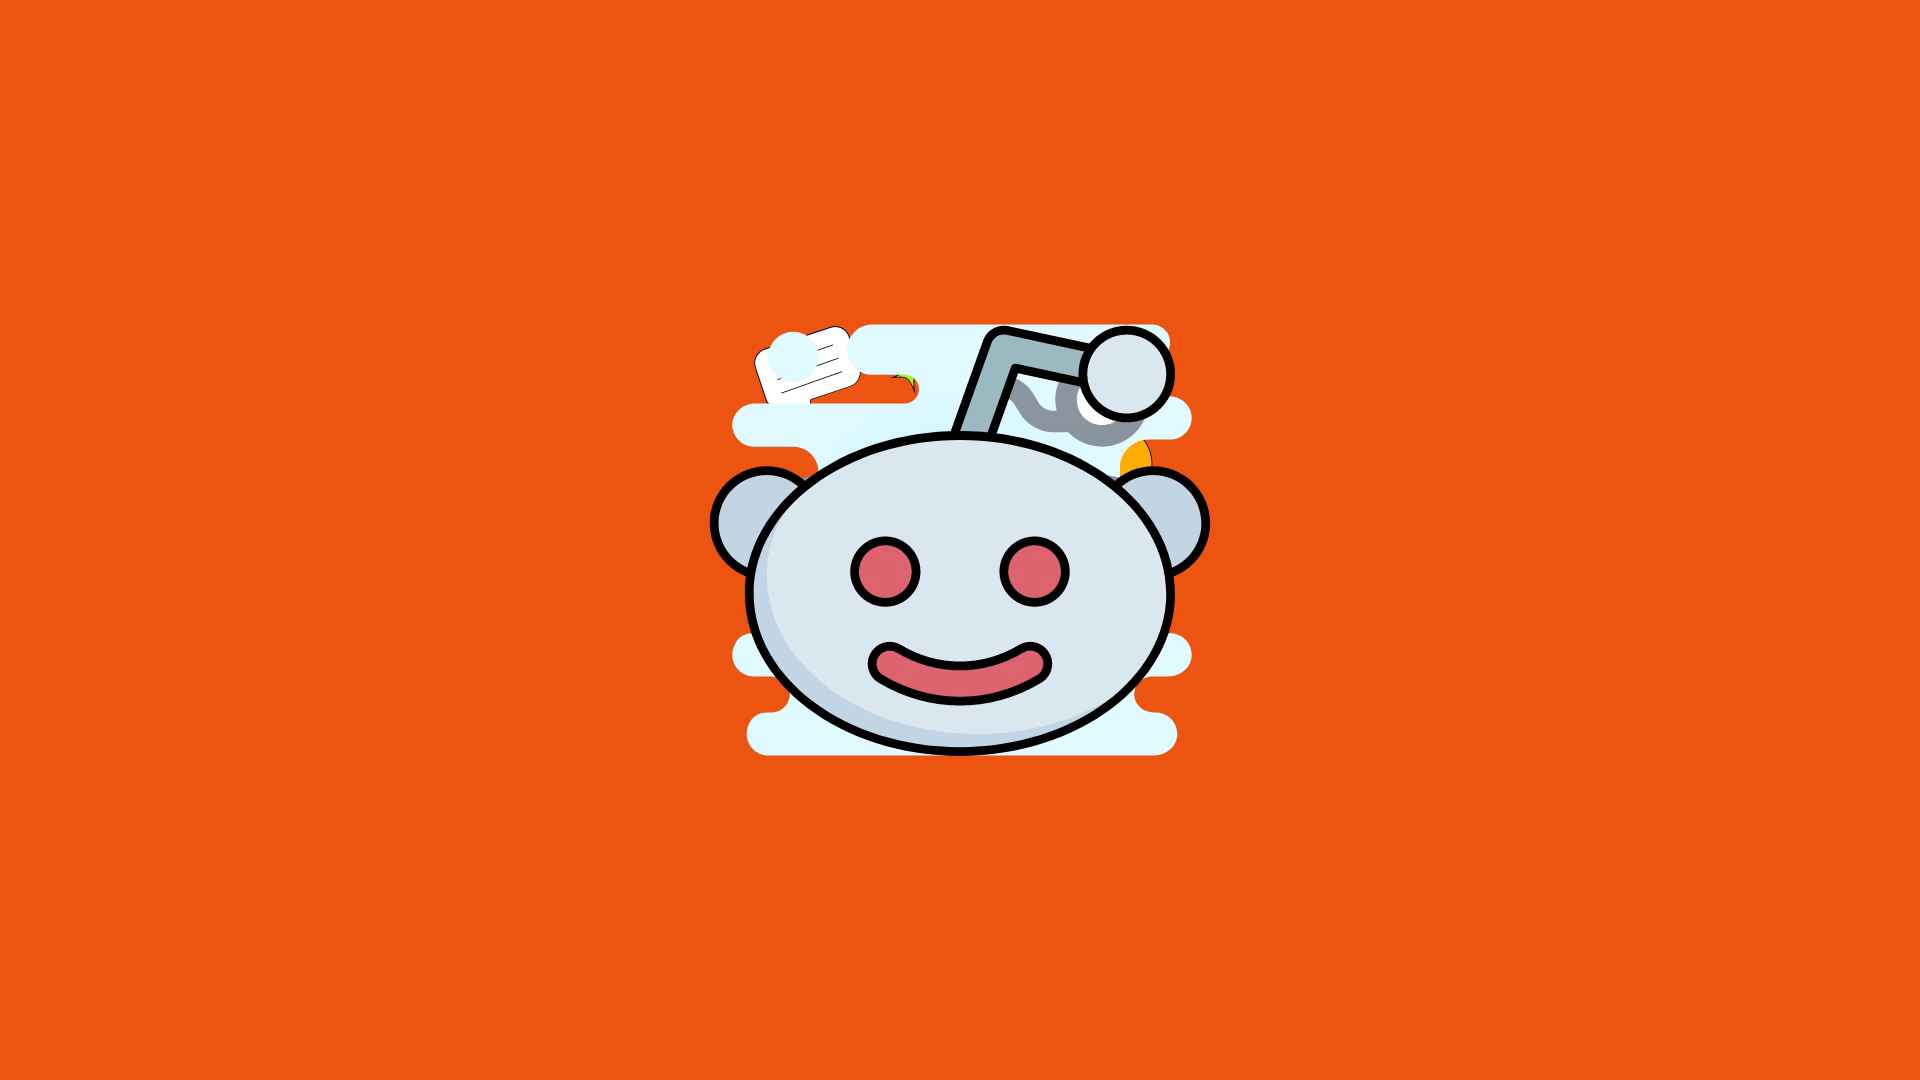 Can you customize your Reddit experience in any way?